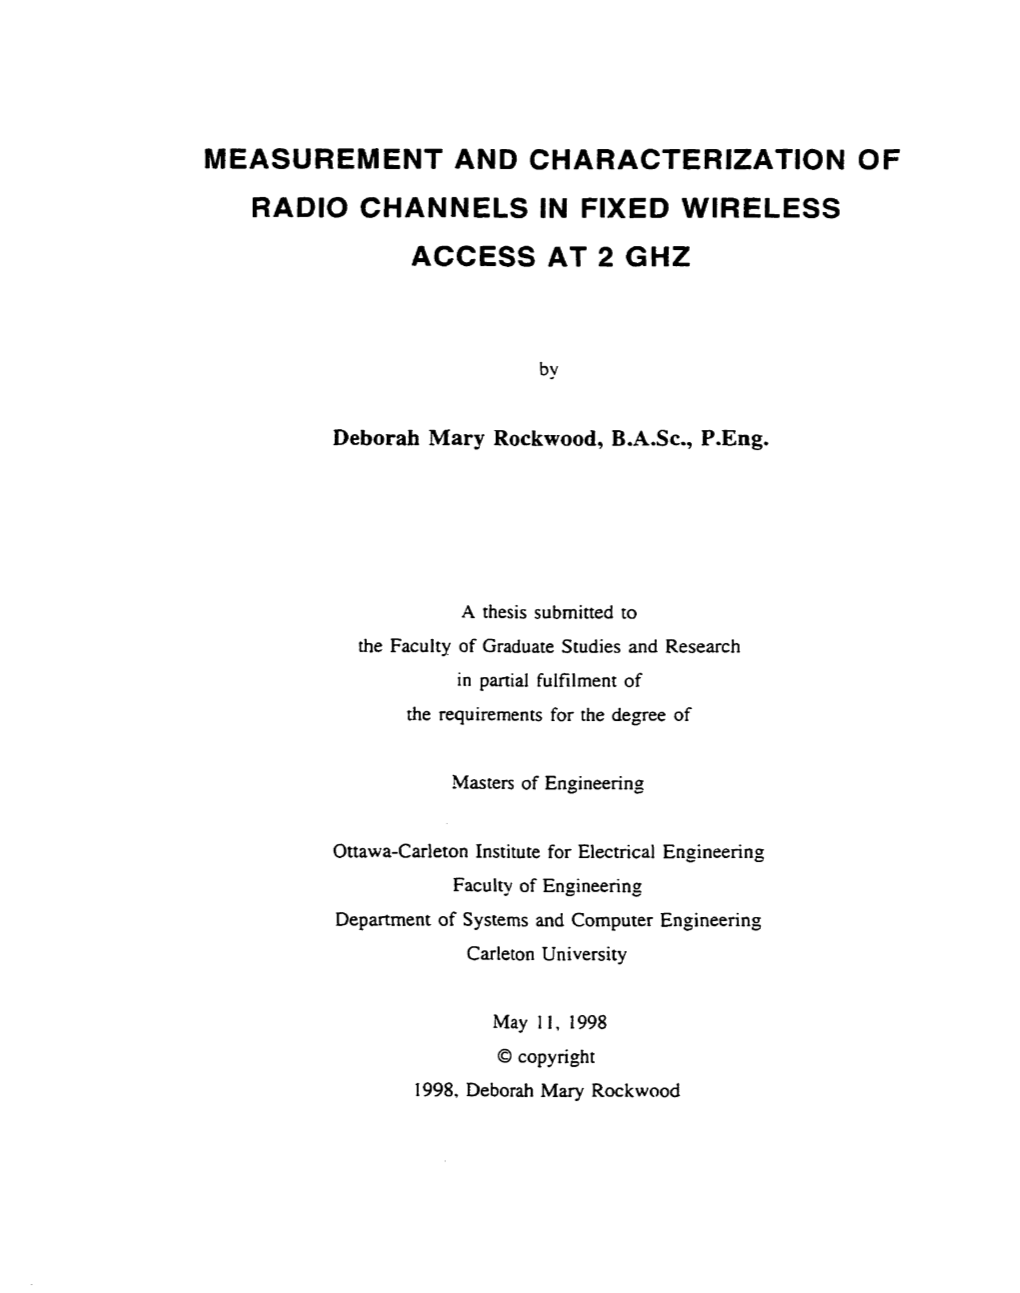 MEASUREMENT and CHARACTERIZATION of RADIO CHANNELS in Flxed WIRELESS ACCESS at 2 GHZ